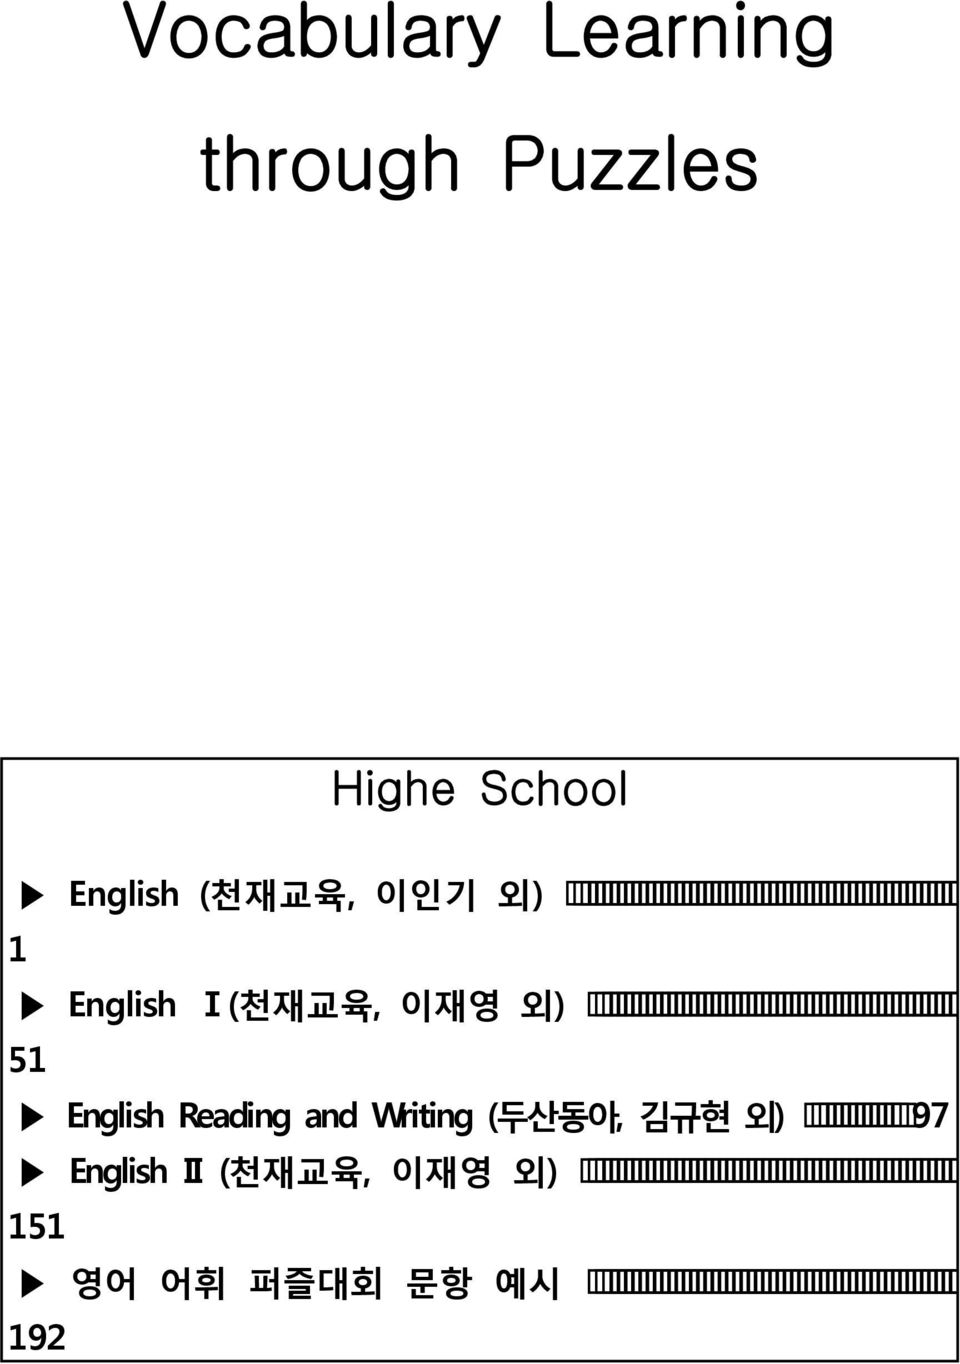 51 English Reading and Writing (두산동아, 김규현 외) 97